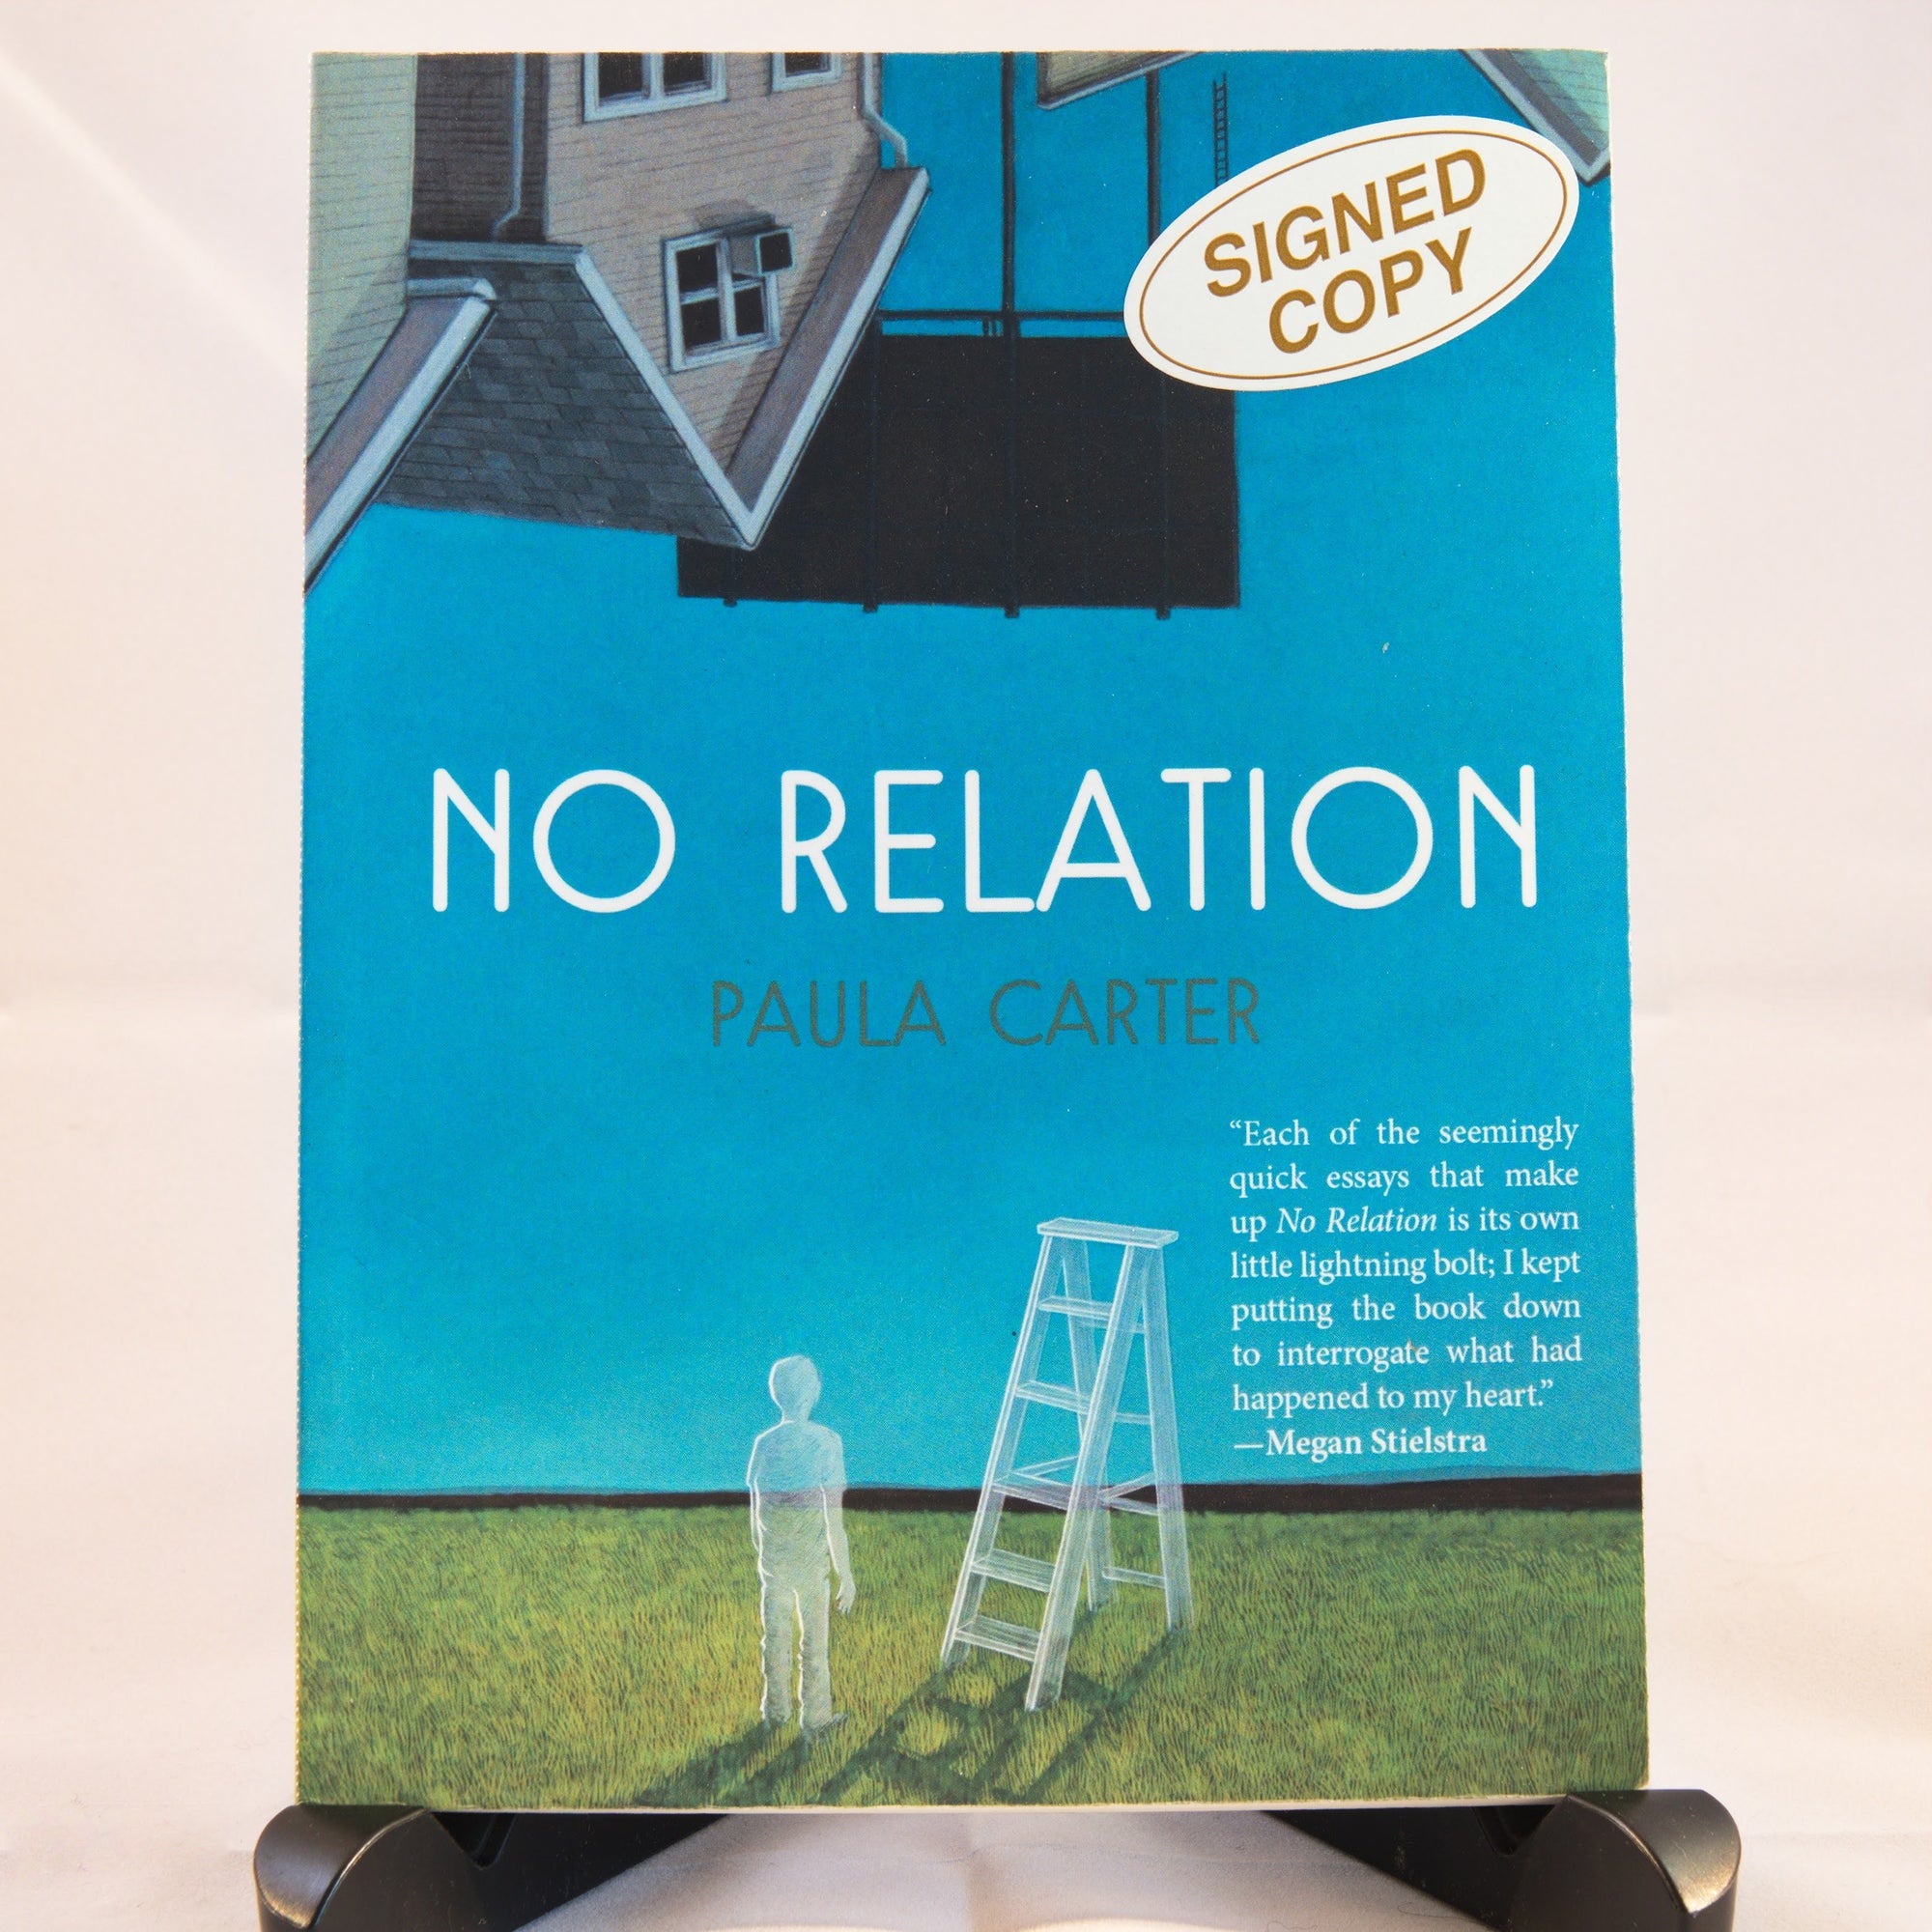 No Relation by author Paula Carter - signed edition (IS)